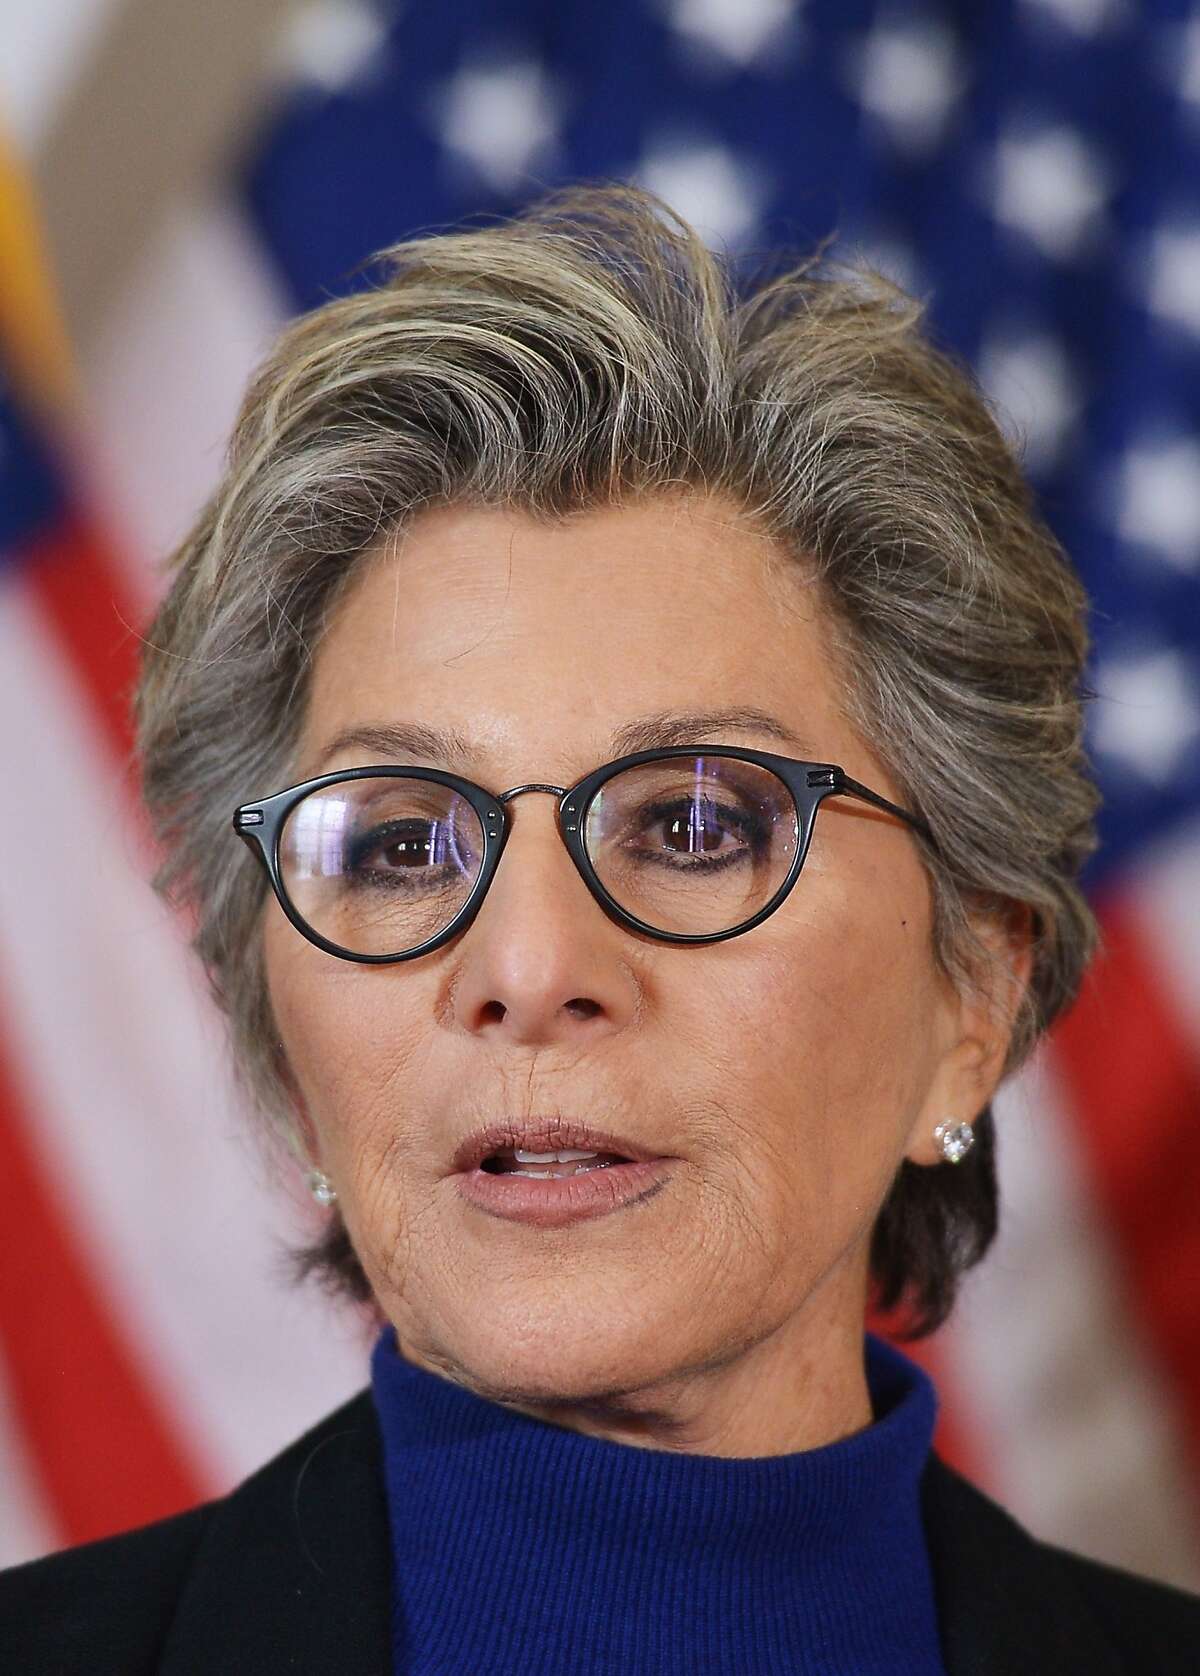 Senator Barbara Boxer, D-CA, speaks during a press conference calling for the creation of an independent military justice system for deal with sexual harassment and assault in the military,on Capitol Hill in Washington, DC on February 6, 2014. AFP PHOTO/Mandel NGANMANDEL NGAN/AFP/Getty Images